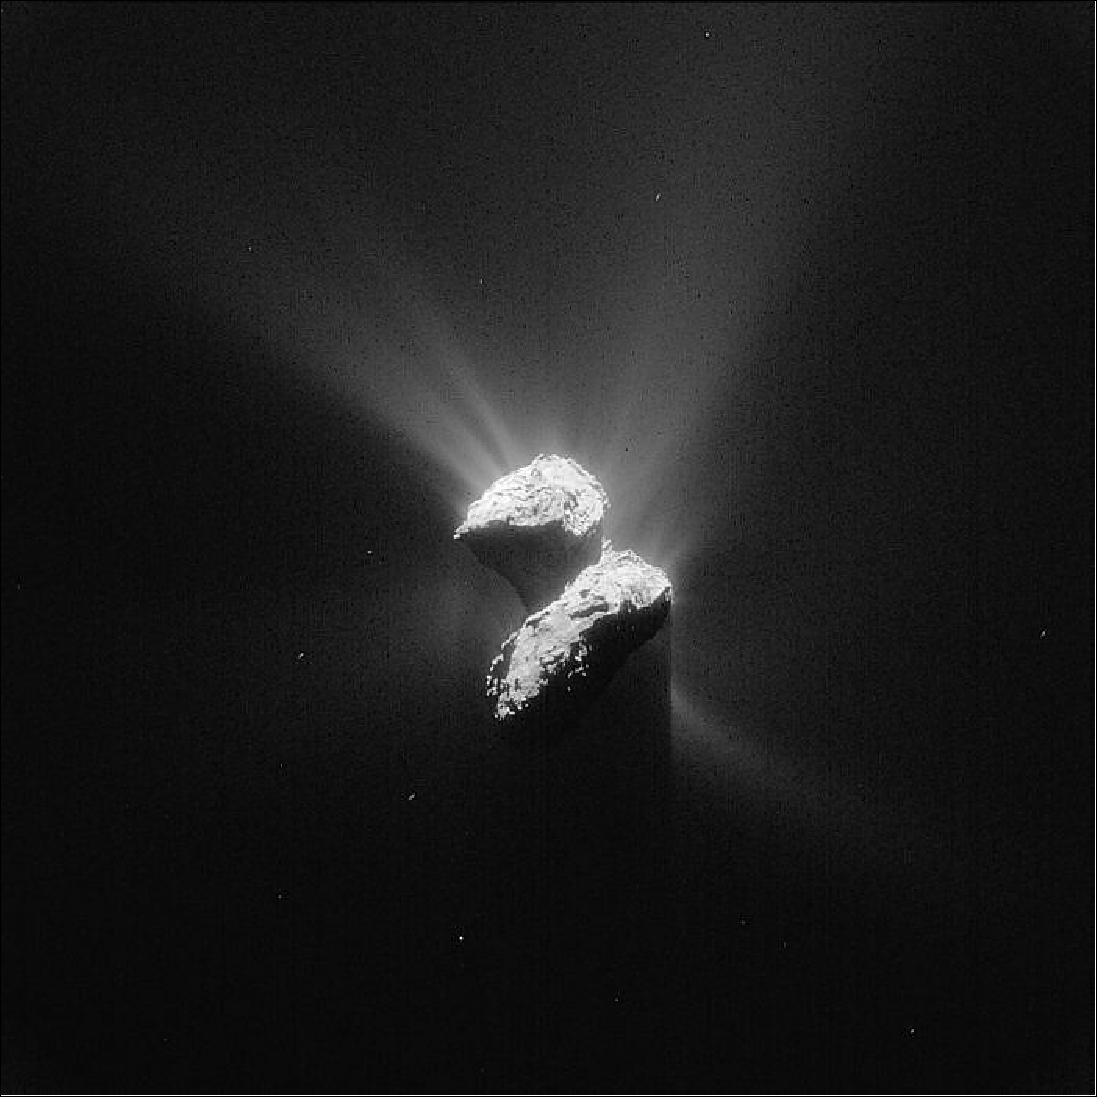 Figure 137: A Rosetta NAVCAM camera single frame image of Comet 67P/Churyumov-Gerasimenko, acquired on 5 June 2015 from a distance of 208 km from the comet center. The image has a resolution of 17.7 m/pixel and measures 18.1 km across (image credit: ESA/Rosetta/NAVCAM – CC BY-SA IGO 3.0)